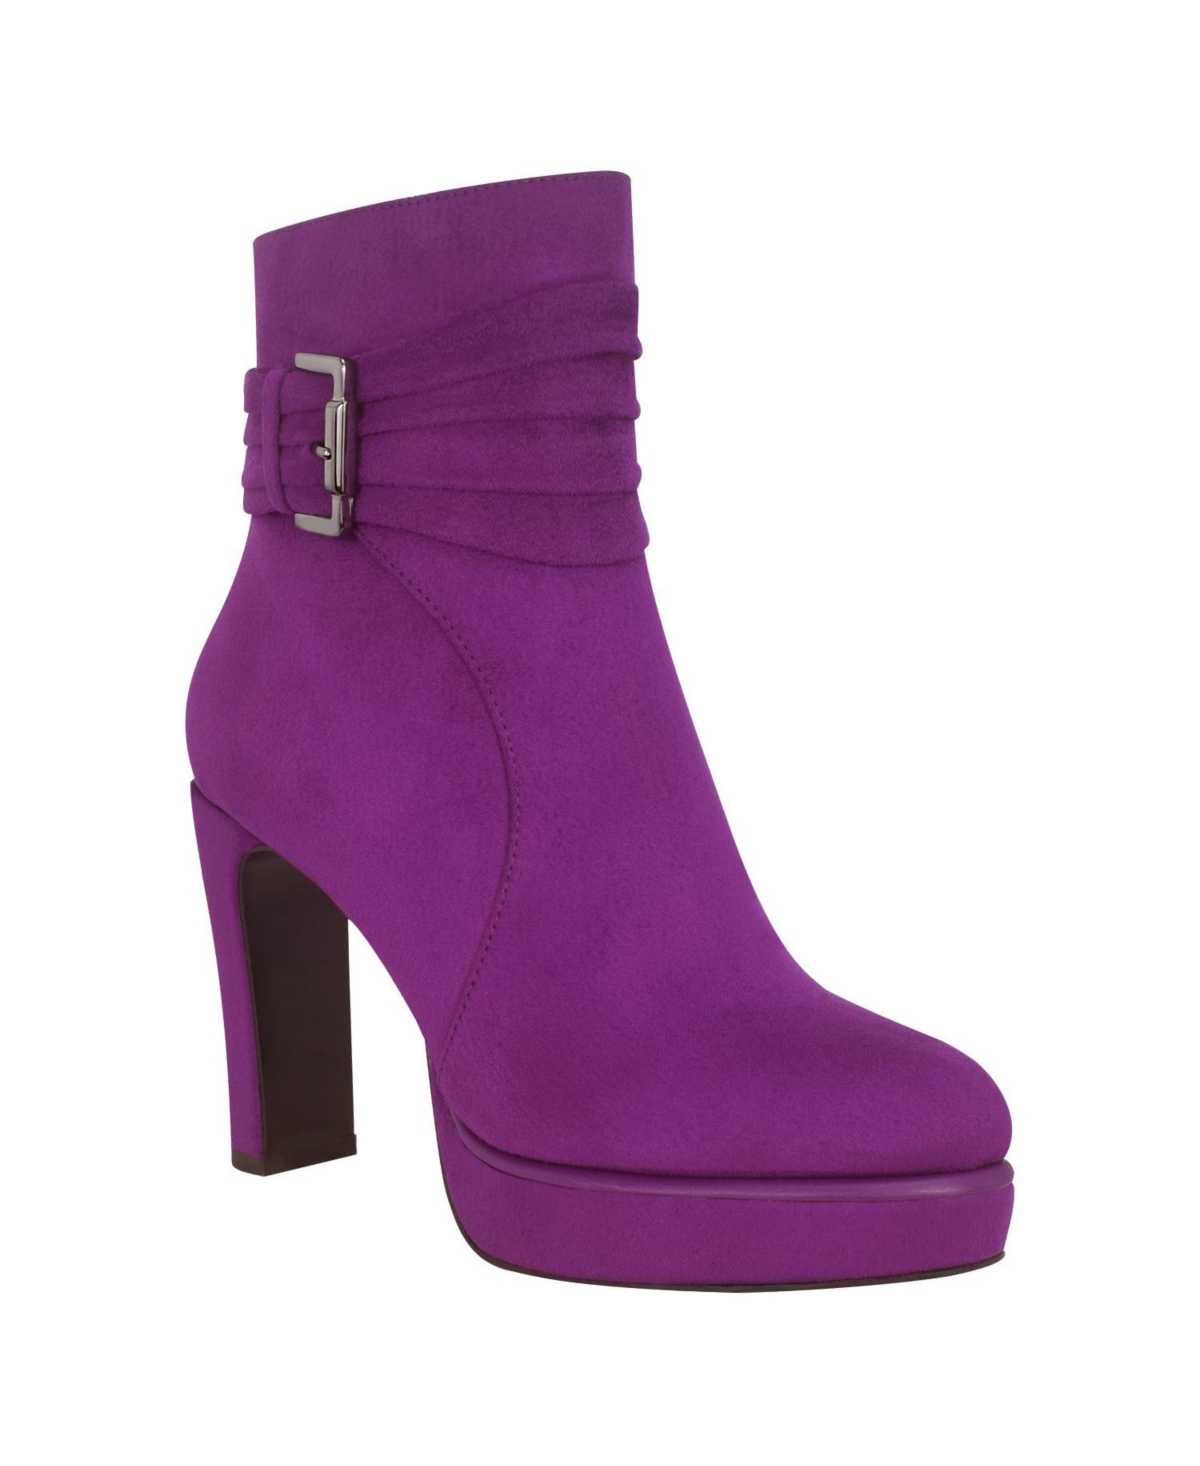 Women's Omira Platform Ankle Boots with Memory Foam - Deep Orchid